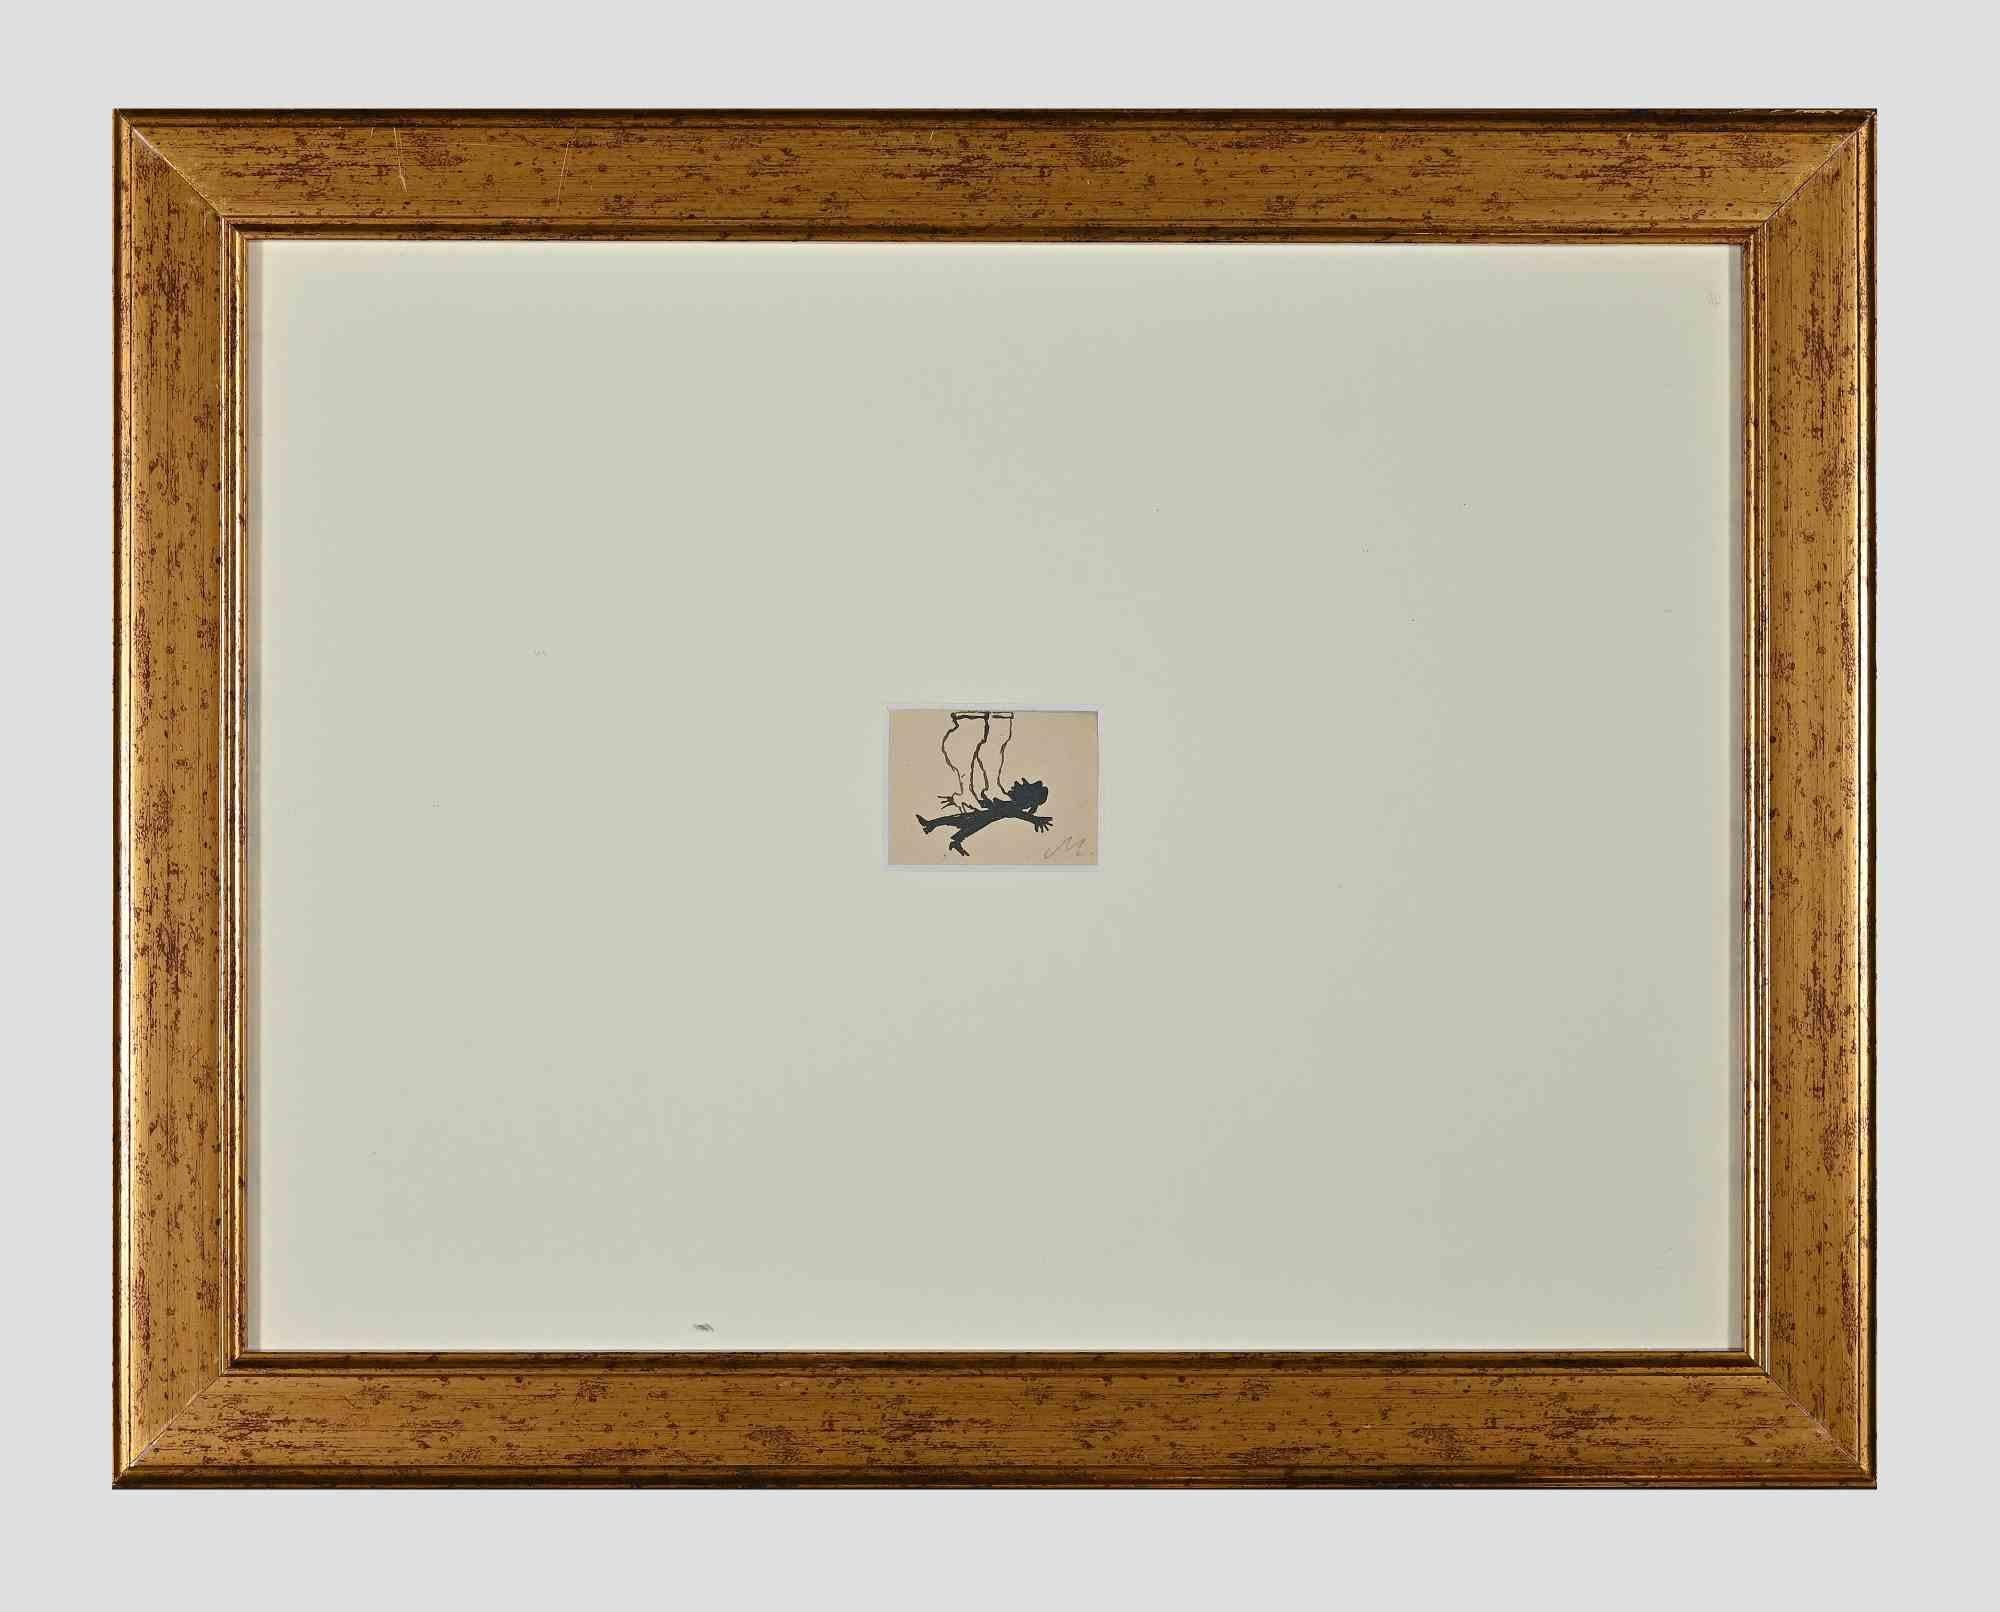 Trampled is an original artwork realized in the half of 20th century by Mino Maccari.

Pen drawing on paper. Hand signed on the lower right margin.

Included an elegant gilded frame.

Mino Maccari was an Italian writer, painter, engraver and